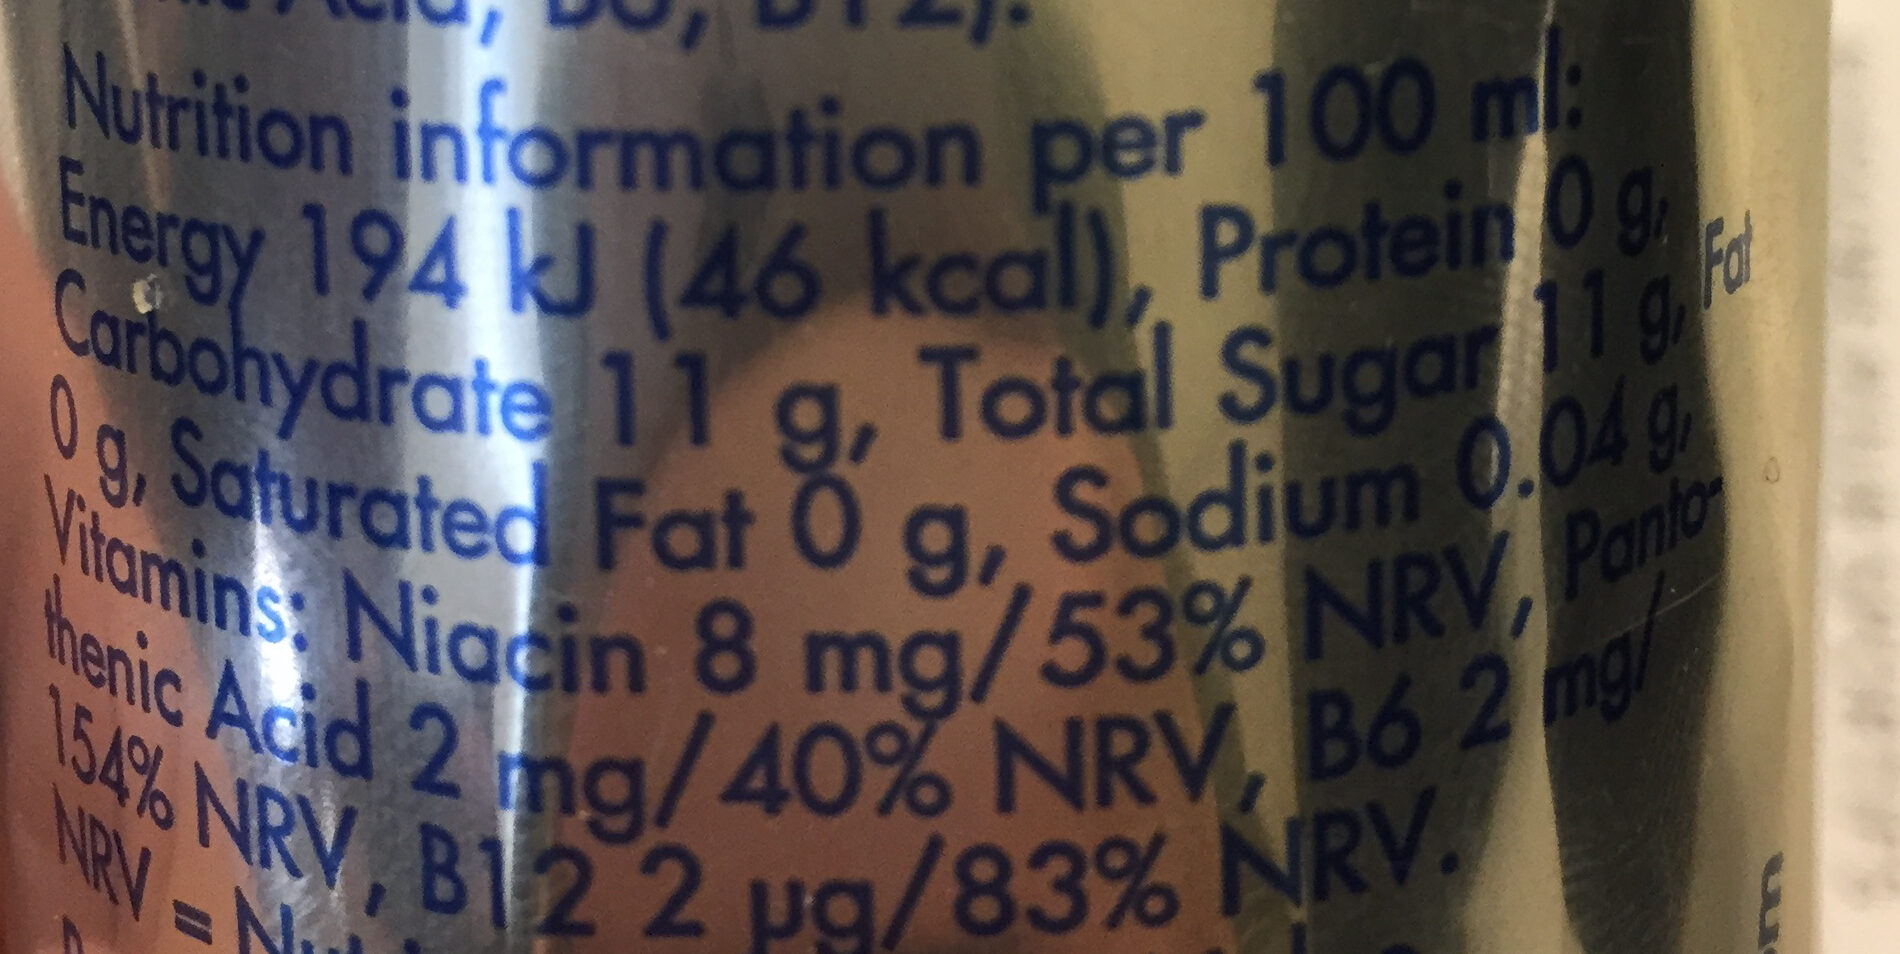 Red bull energy drink - Nutrition facts